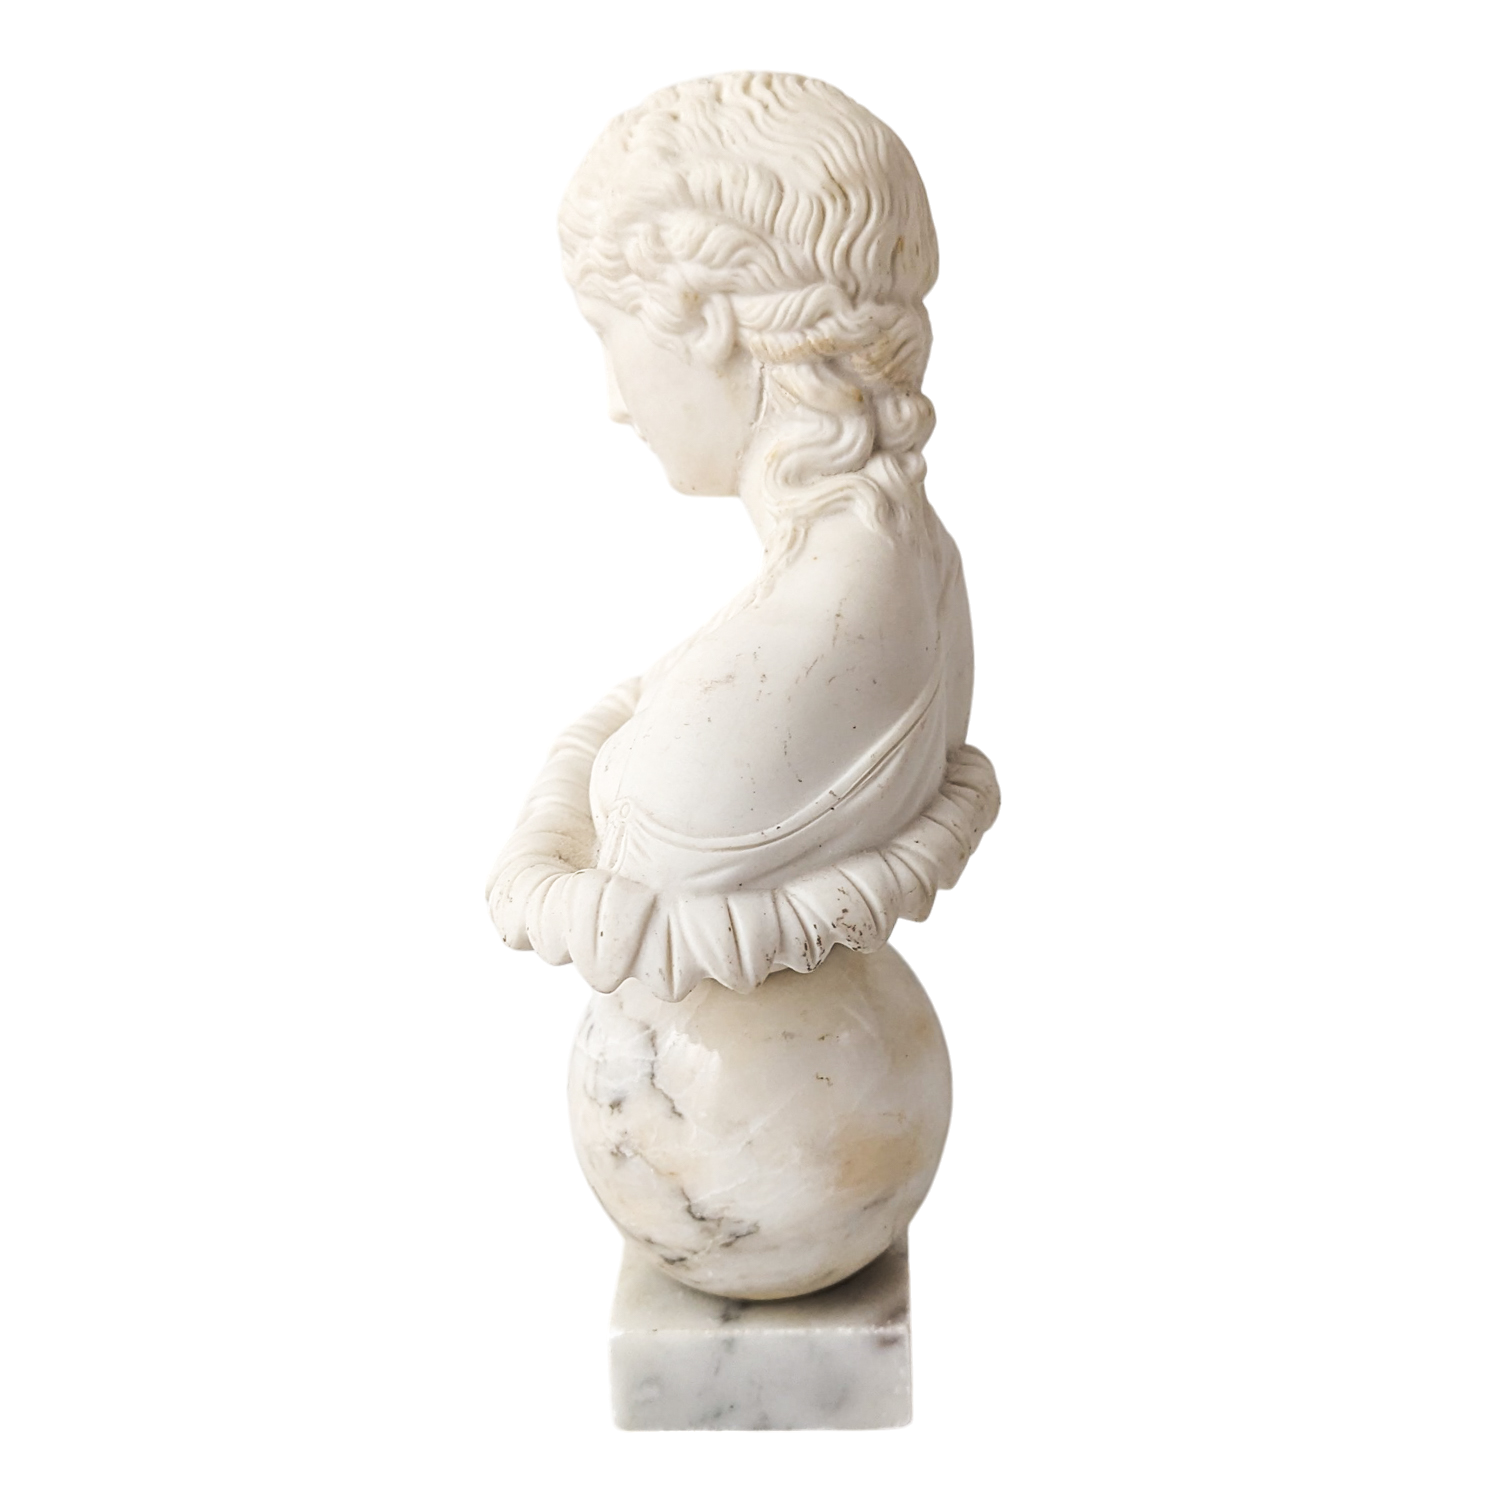 Vintage Parian Bust of Clytie the Water Nymph